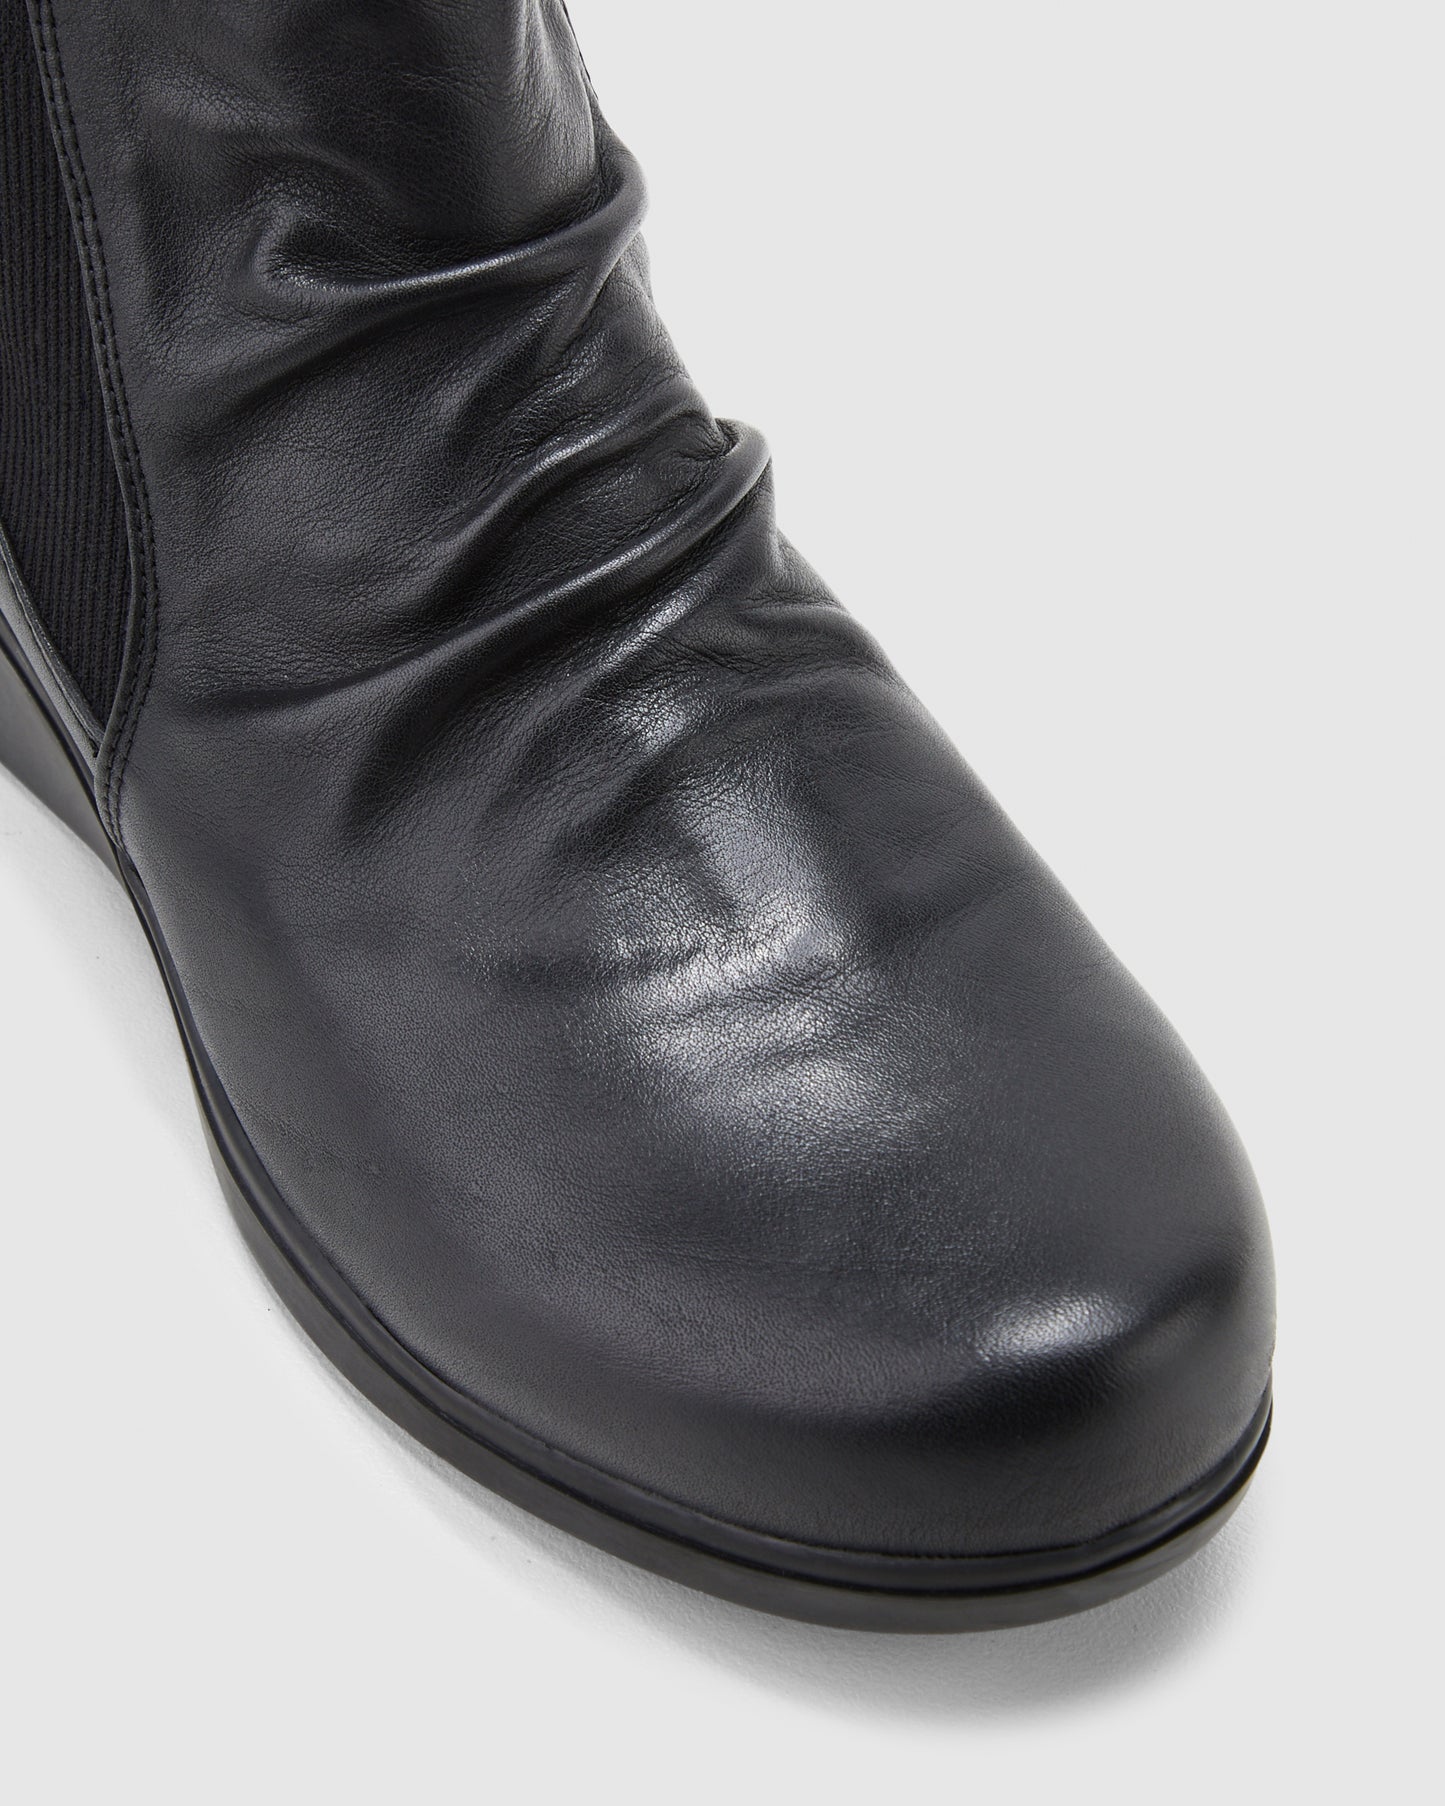 The Boot Black